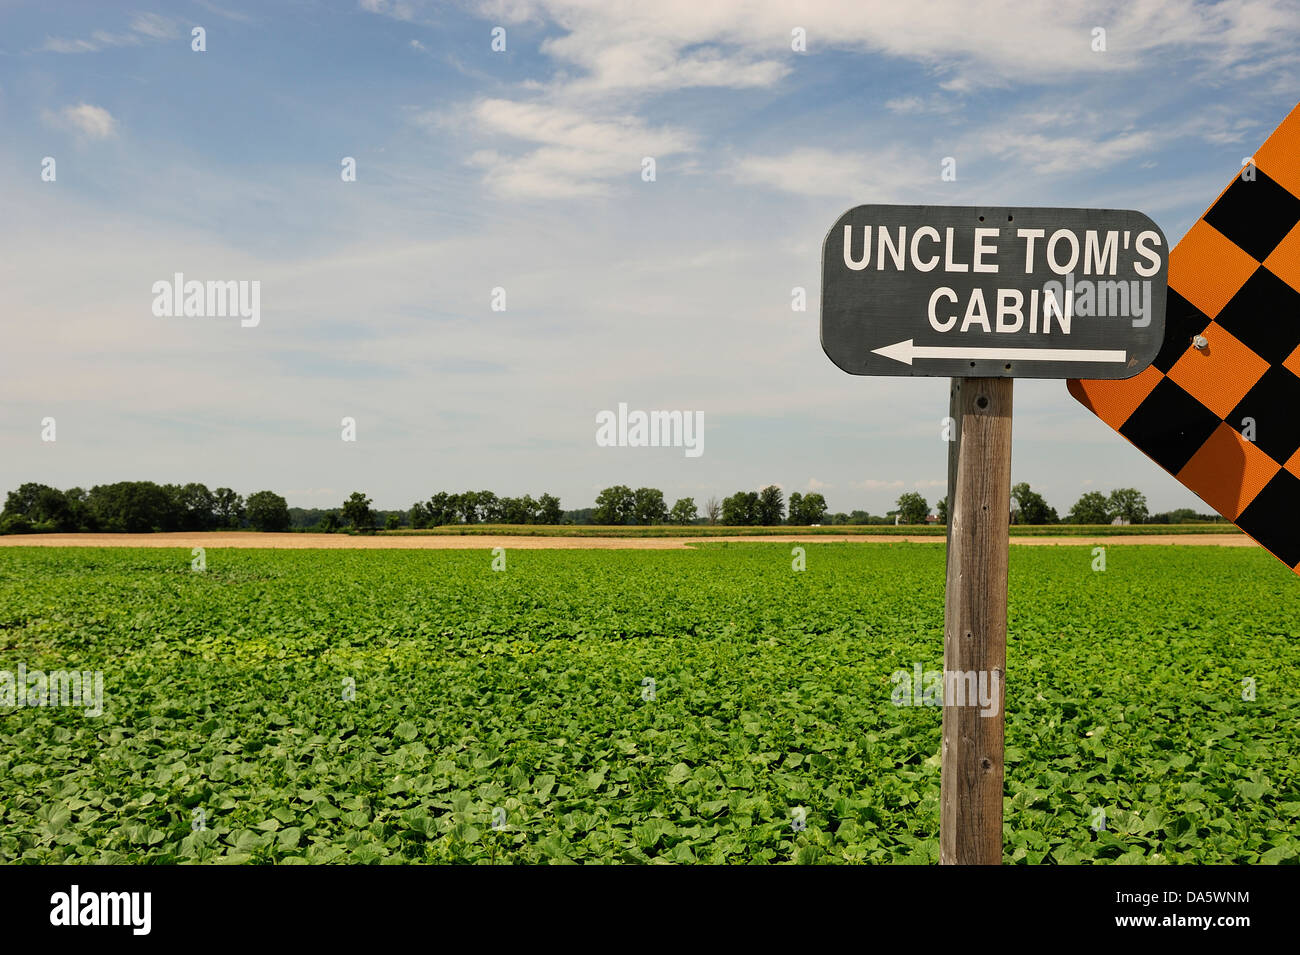 Canada, Dresden, Farm, Green, Ontario, Uncle Tom's Cabin, Uncle Tom, agriculture, crop, day, daytime, farm land, farming, field, Stock Photo